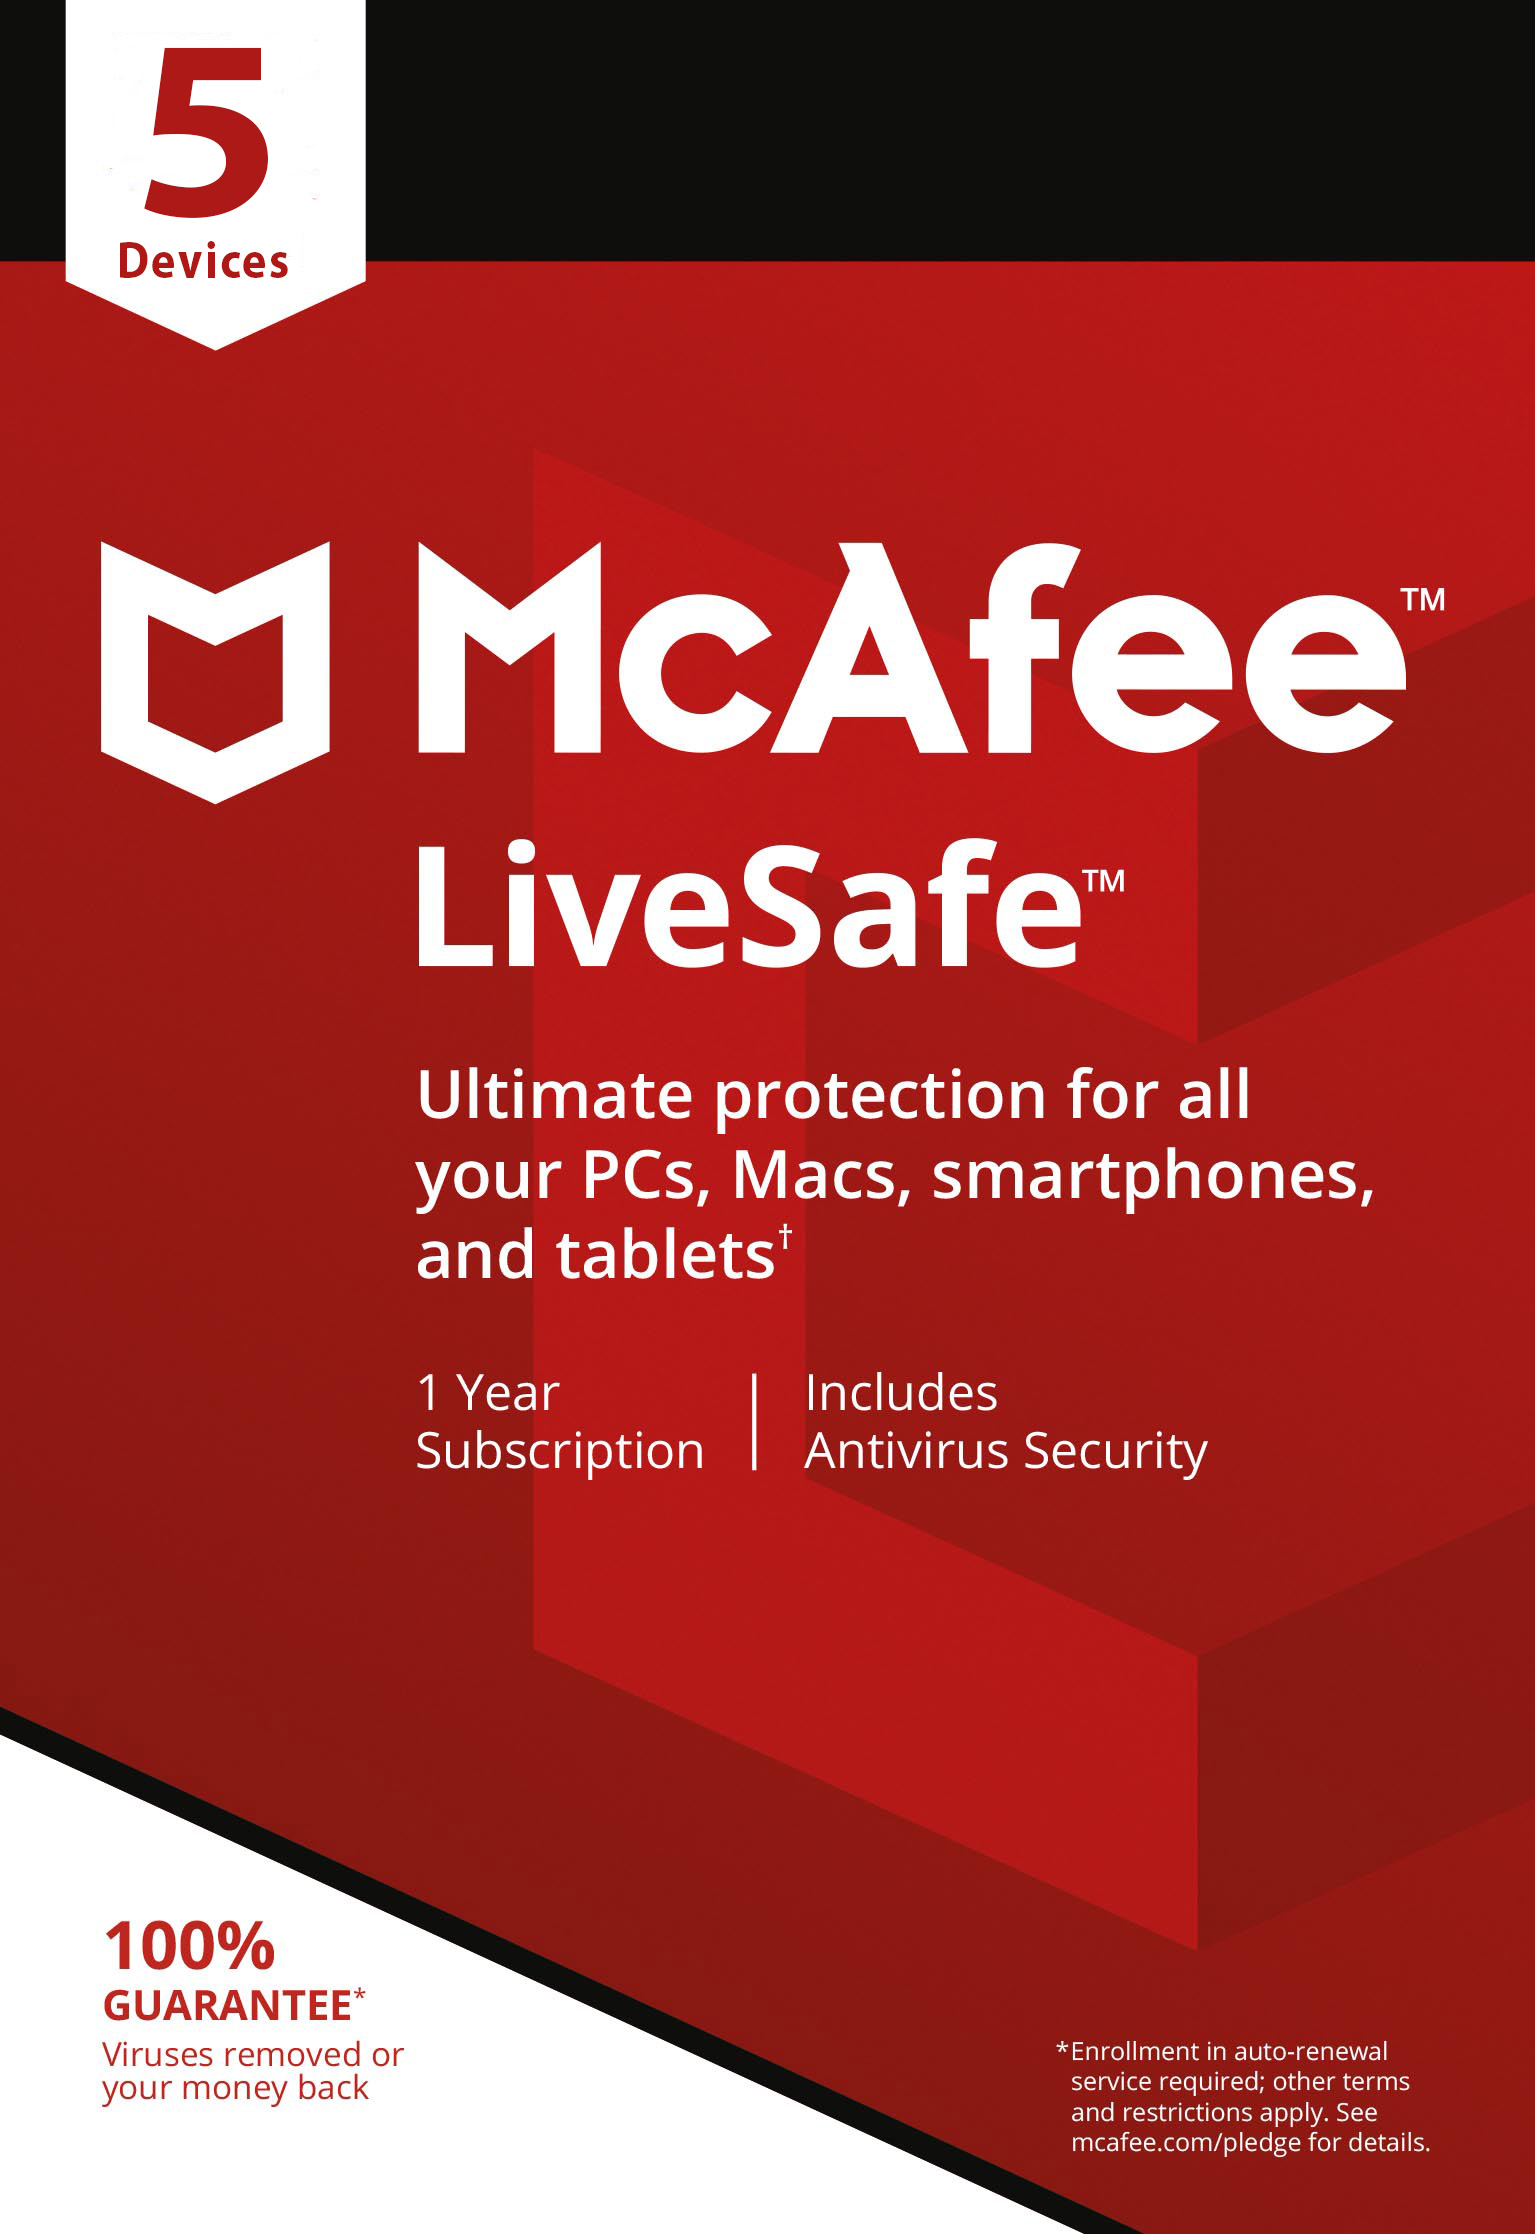 mcafee live safe 5 devices 1 year